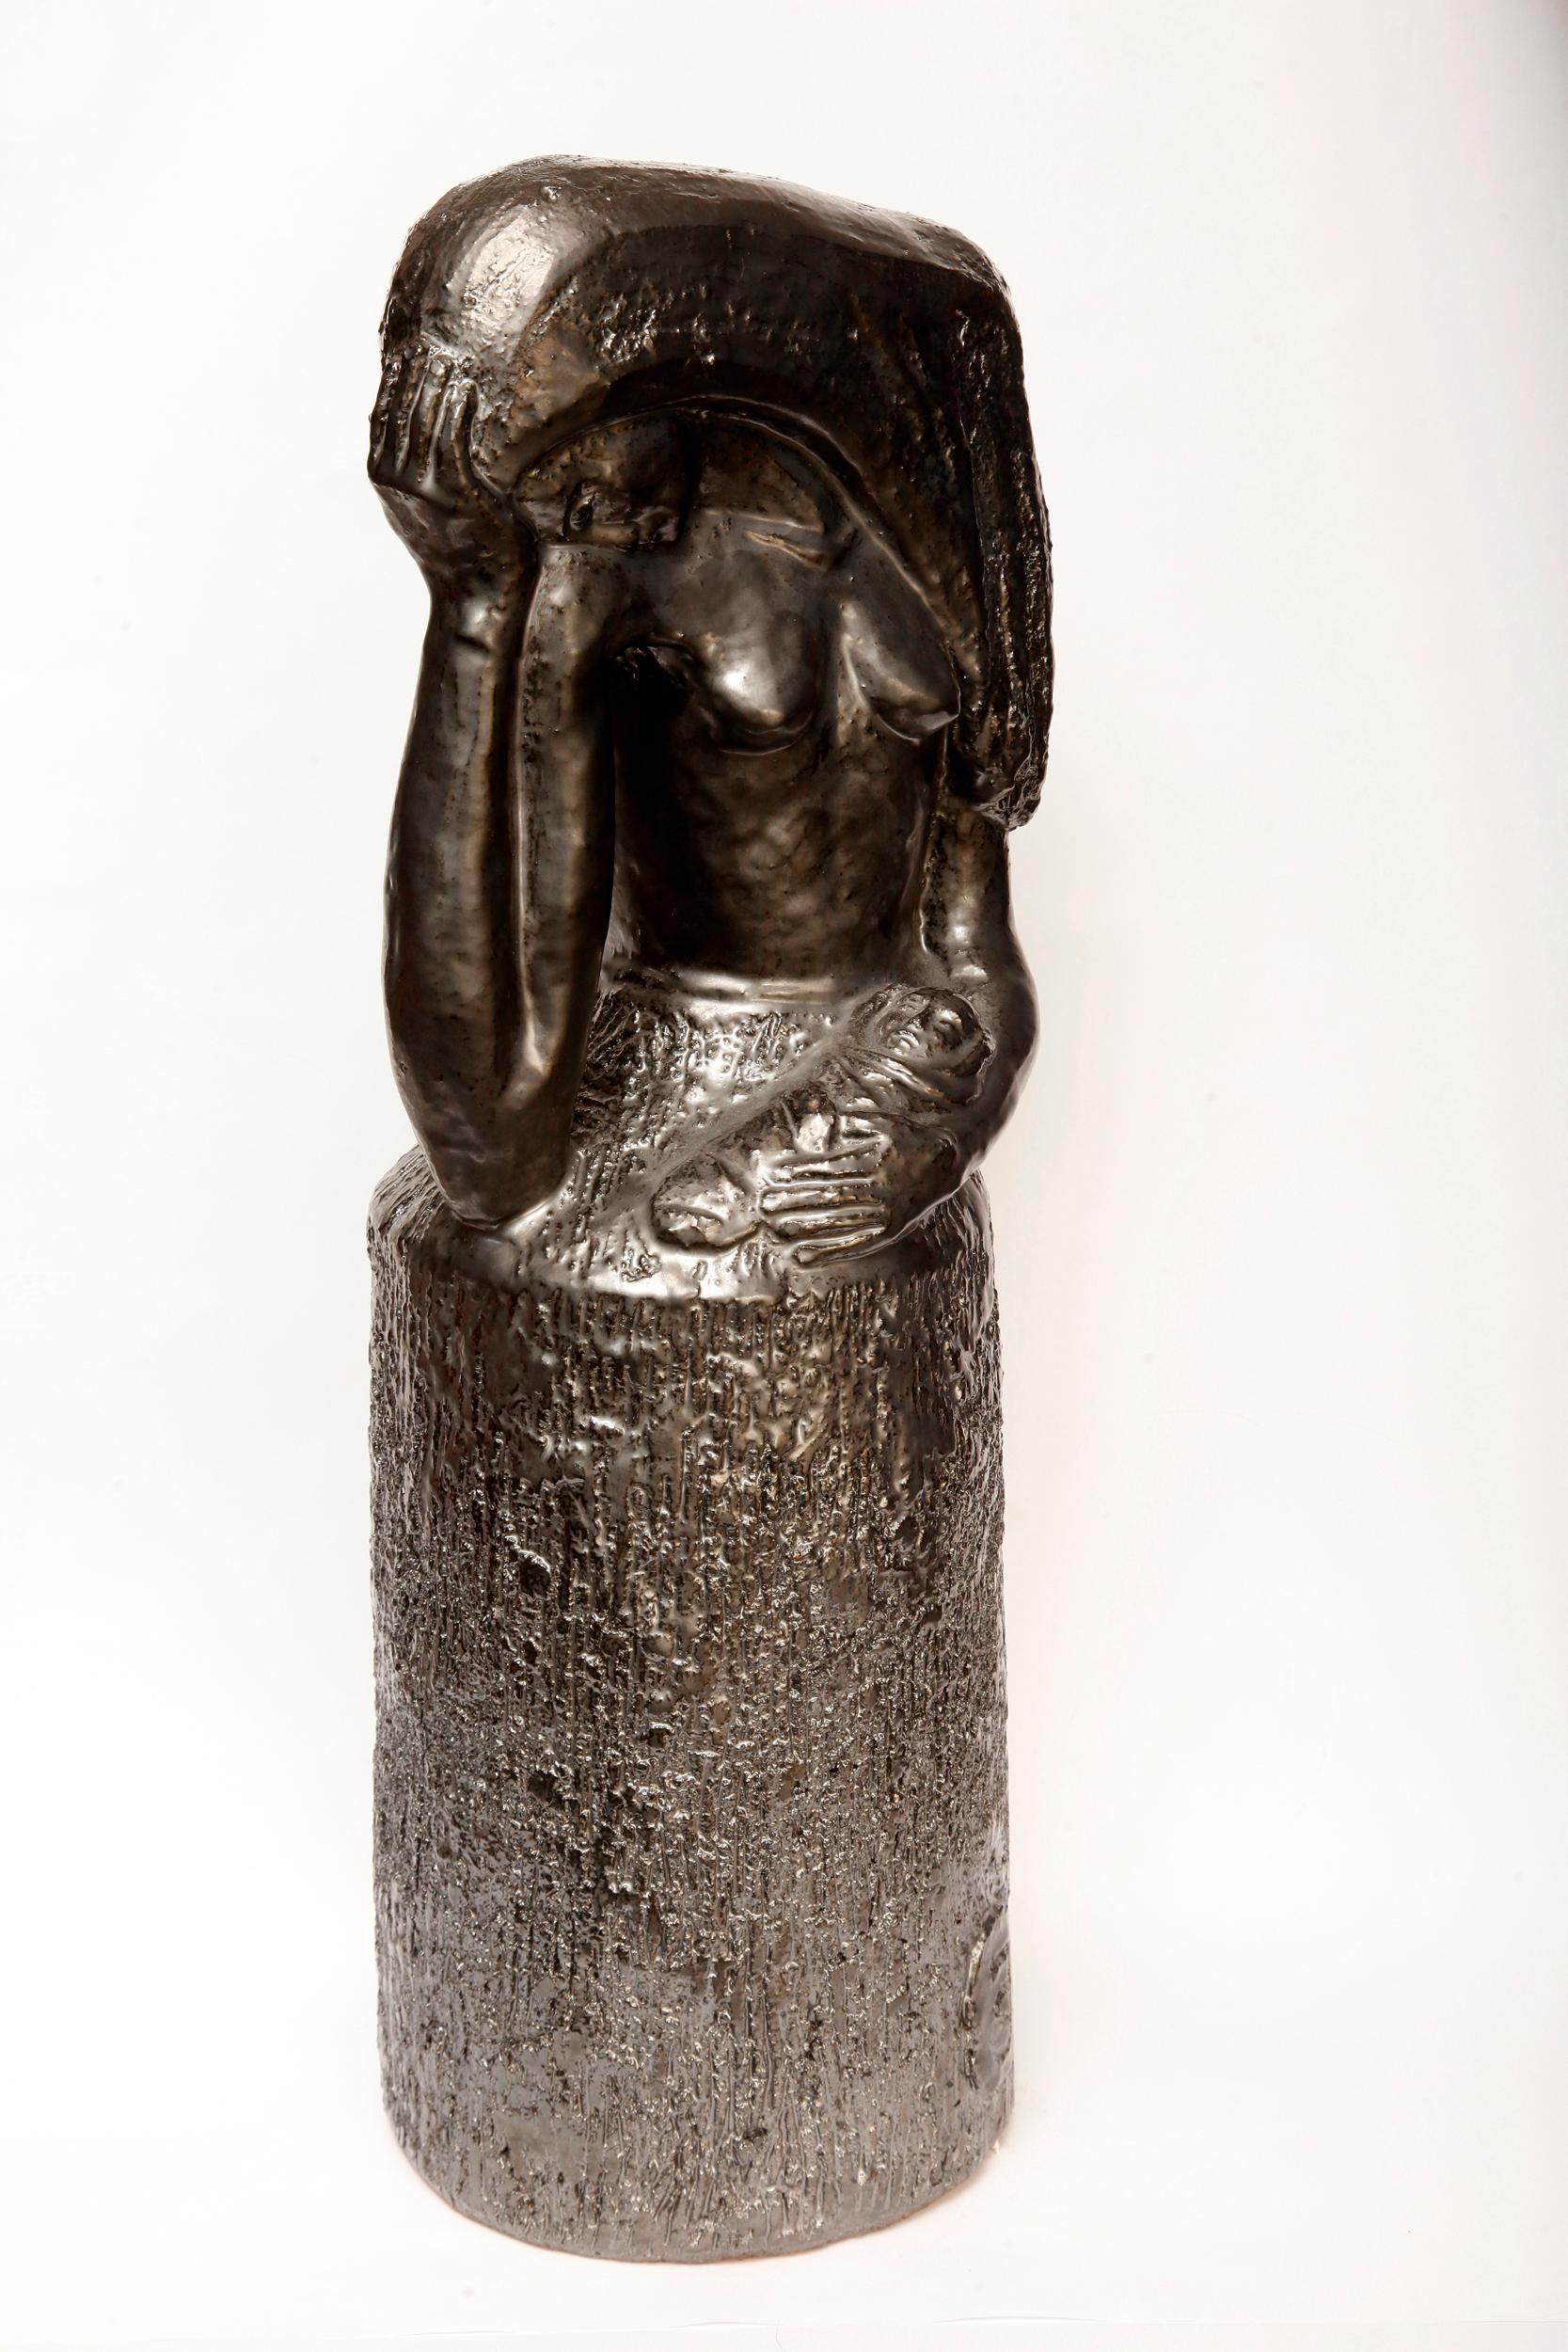 Mid-Century Modern Midcentury Clay and Glazed Sculpture of a Woman, Jerzy Sacha, Poland, 1970s For Sale